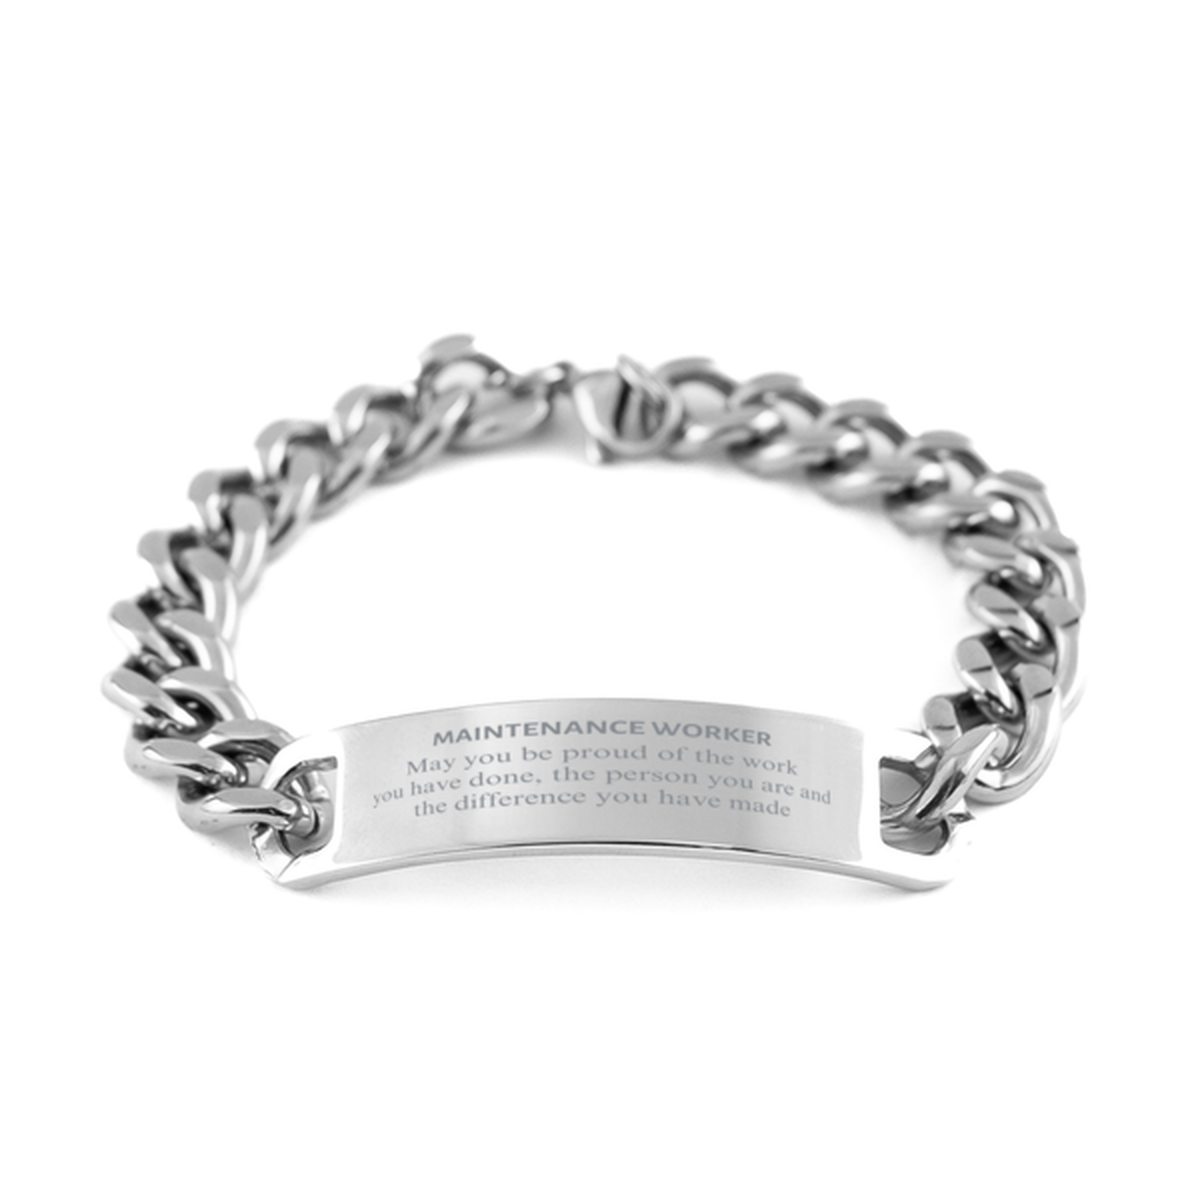 Maintenance Worker May you be proud of the work you have done, Retirement Maintenance Worker Cuban Chain Stainless Steel Bracelet for Colleague Appreciation Gifts Amazing for Maintenance Worker